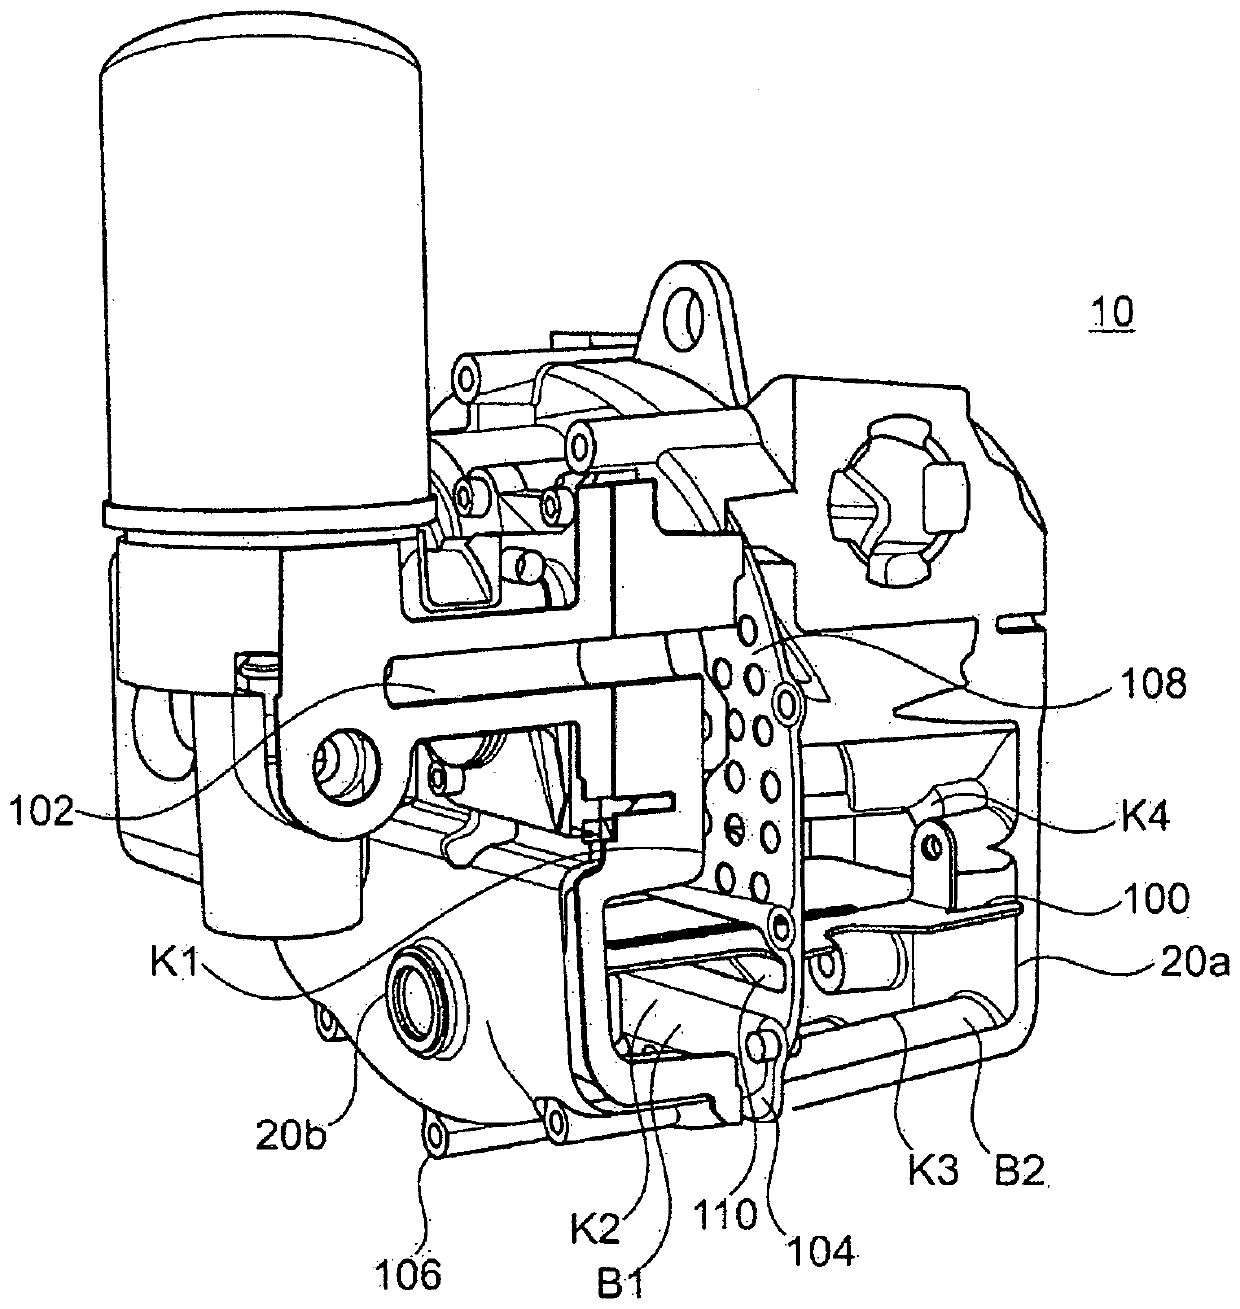 Screw-type compressor for a utility vehicle